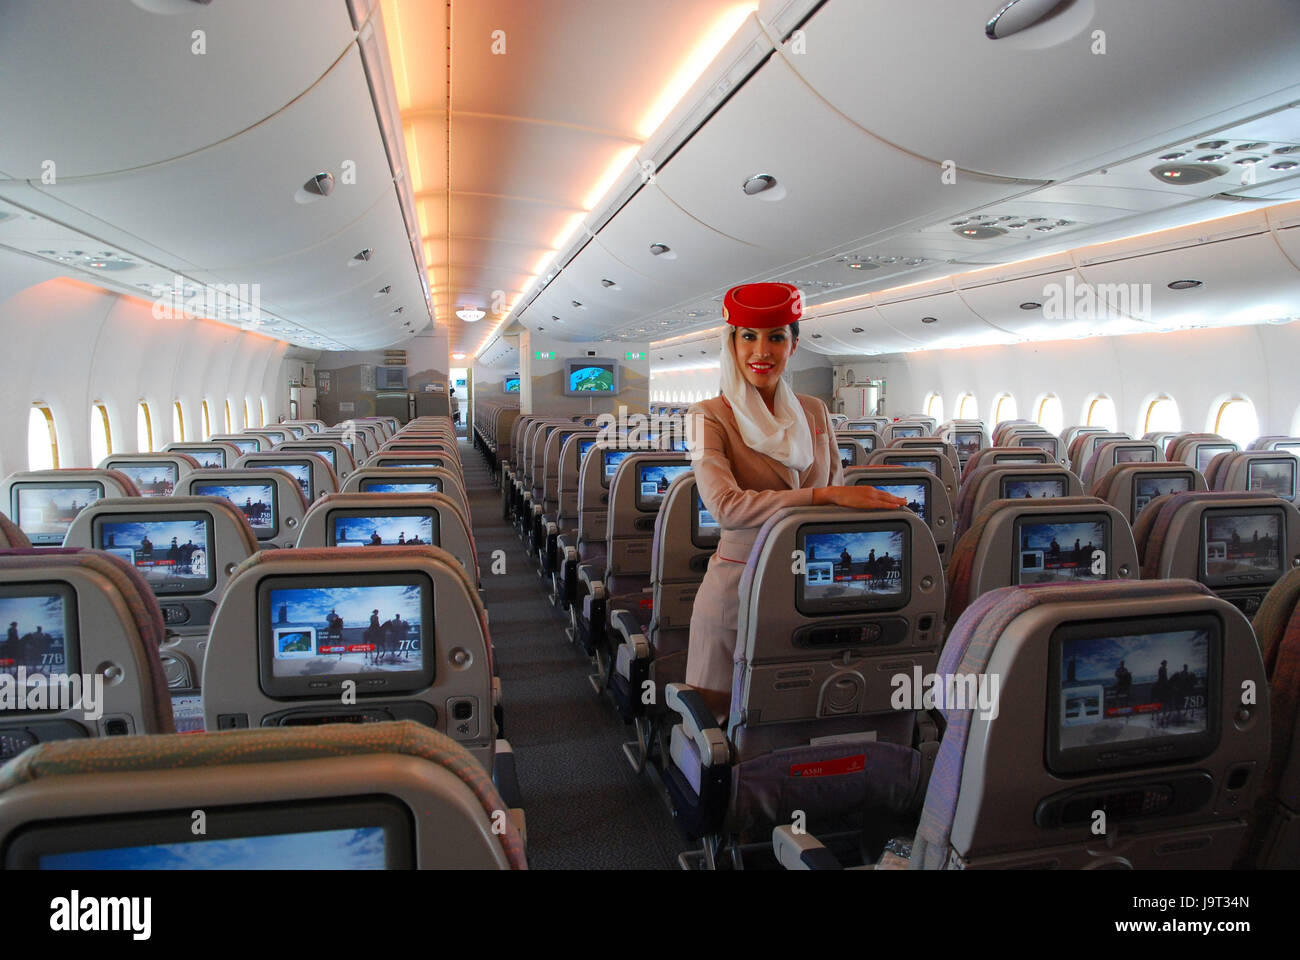 Civil aviation,air liner,airbus A380,cabin,rows,flight attendant, Stock Photo